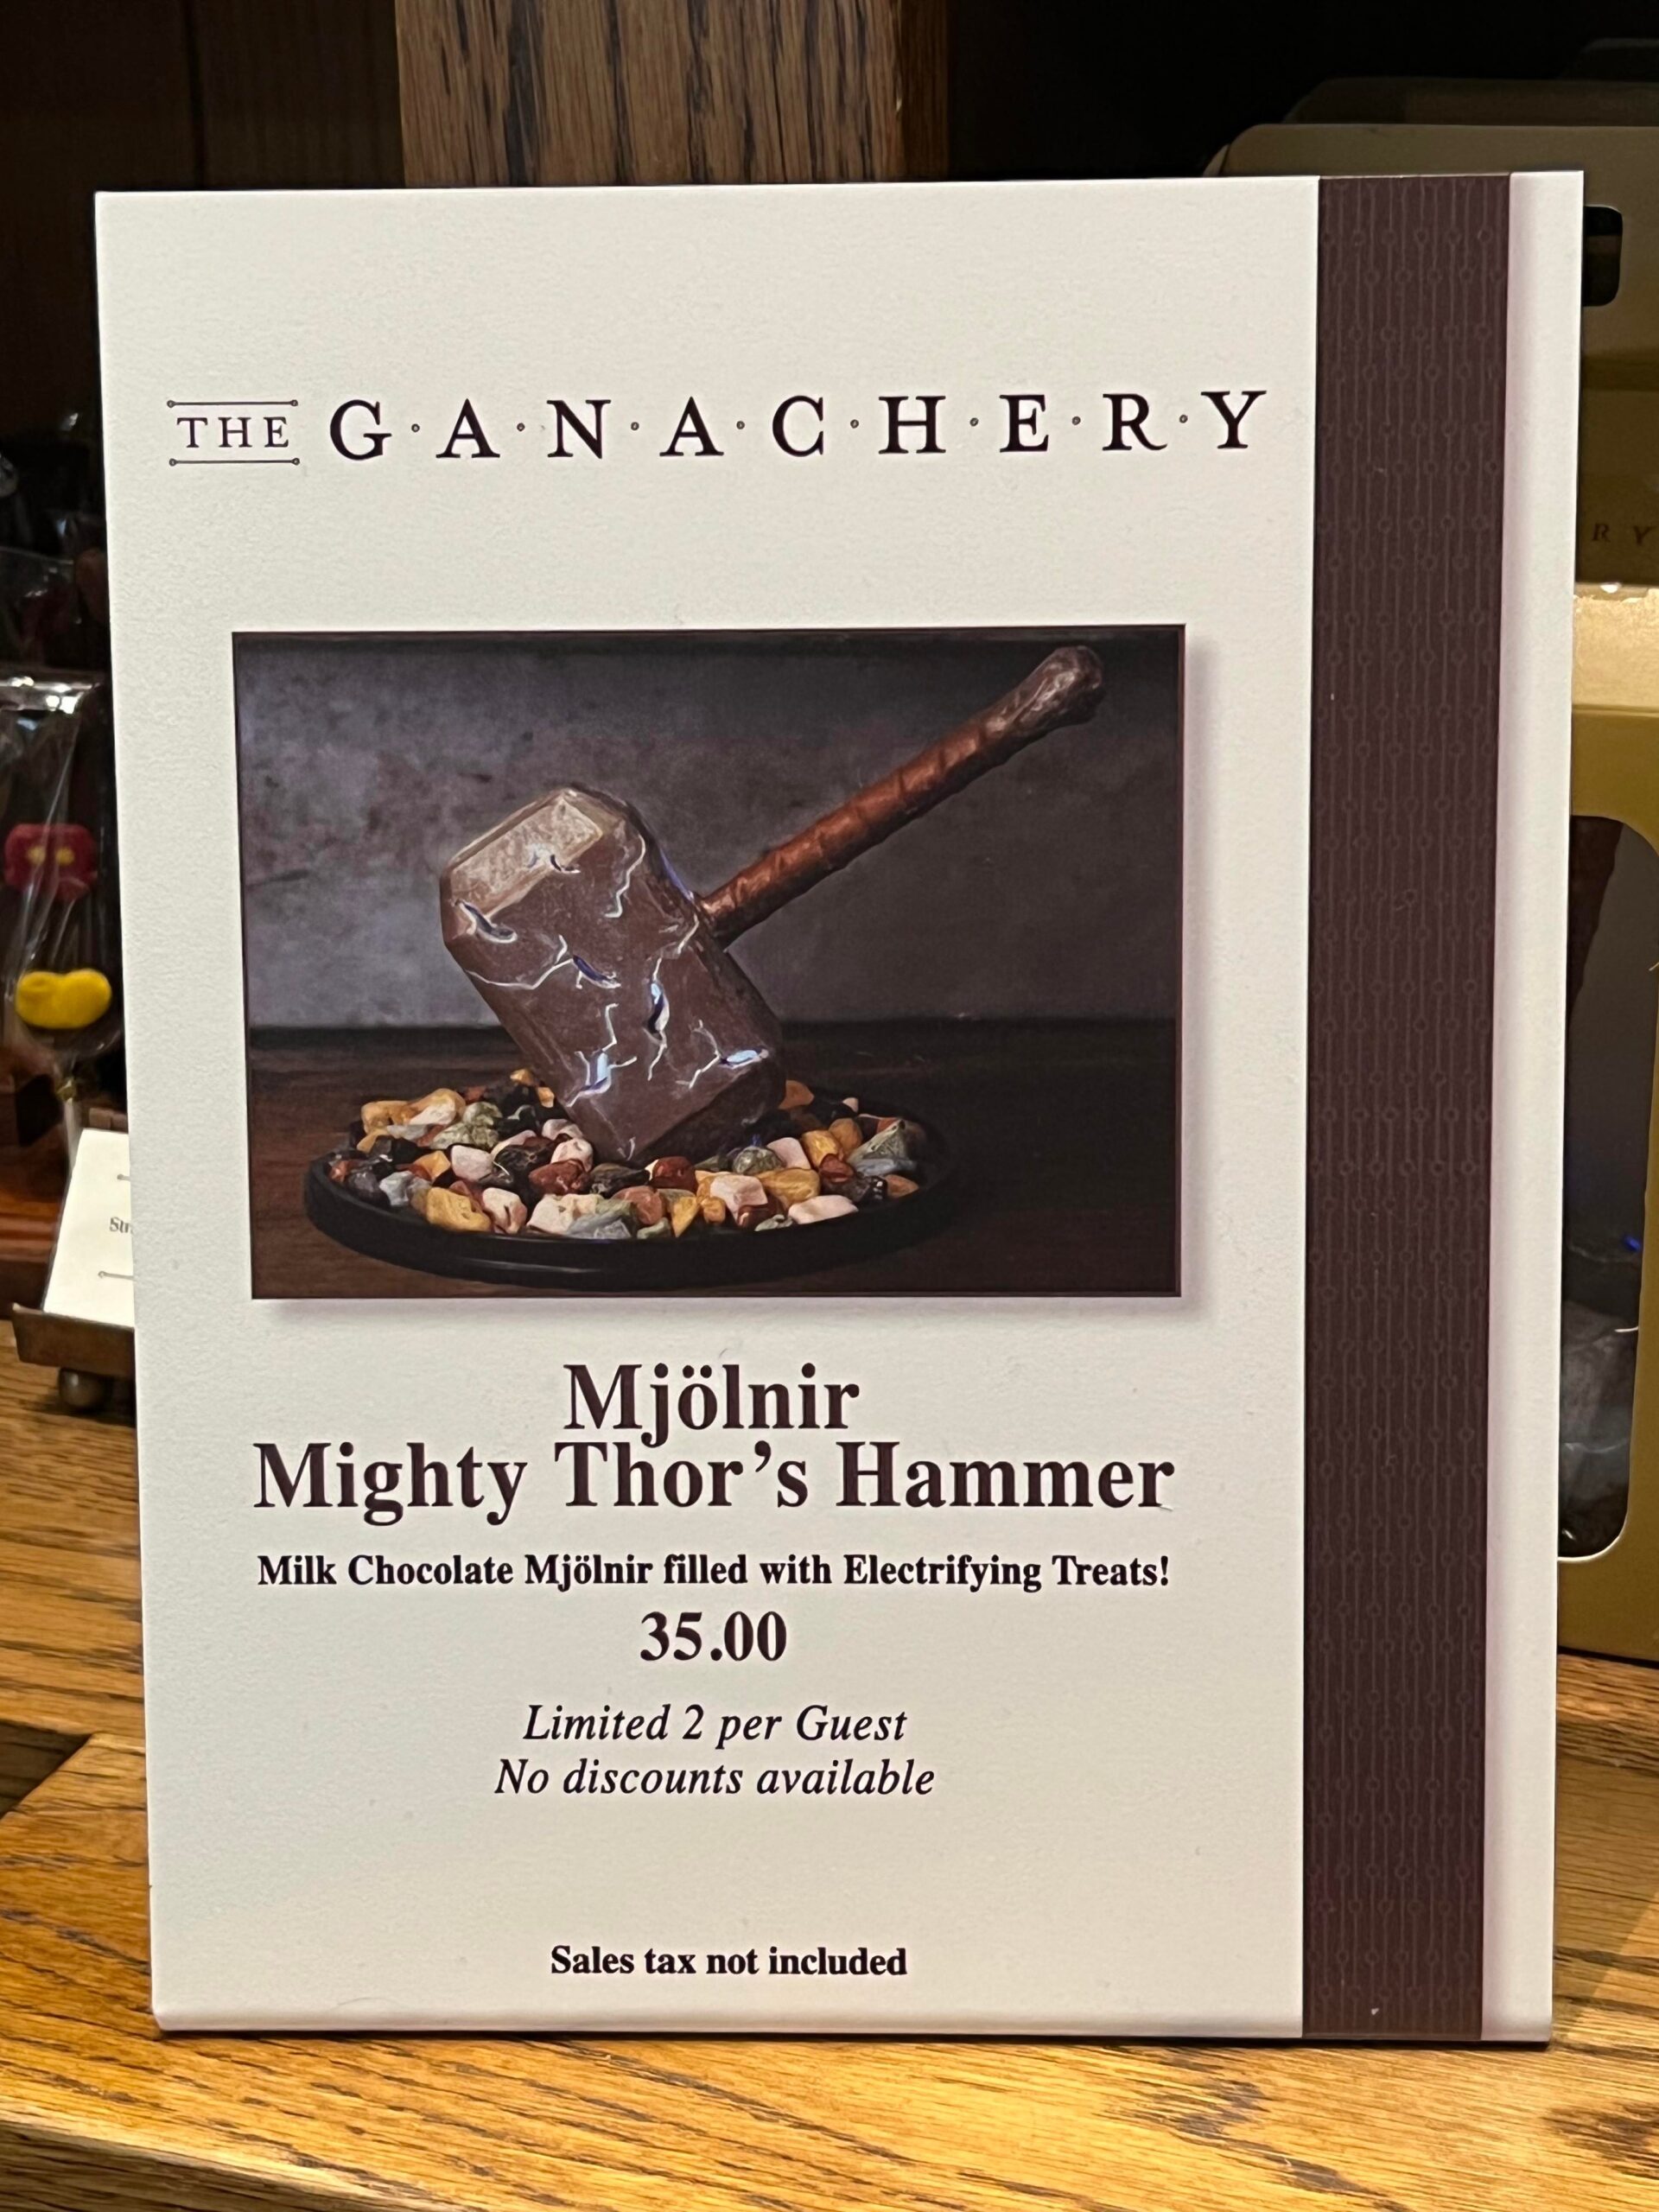 Chocolate Mjolnir Now Available for a Limited Time at The Ganachery in Disney Springs